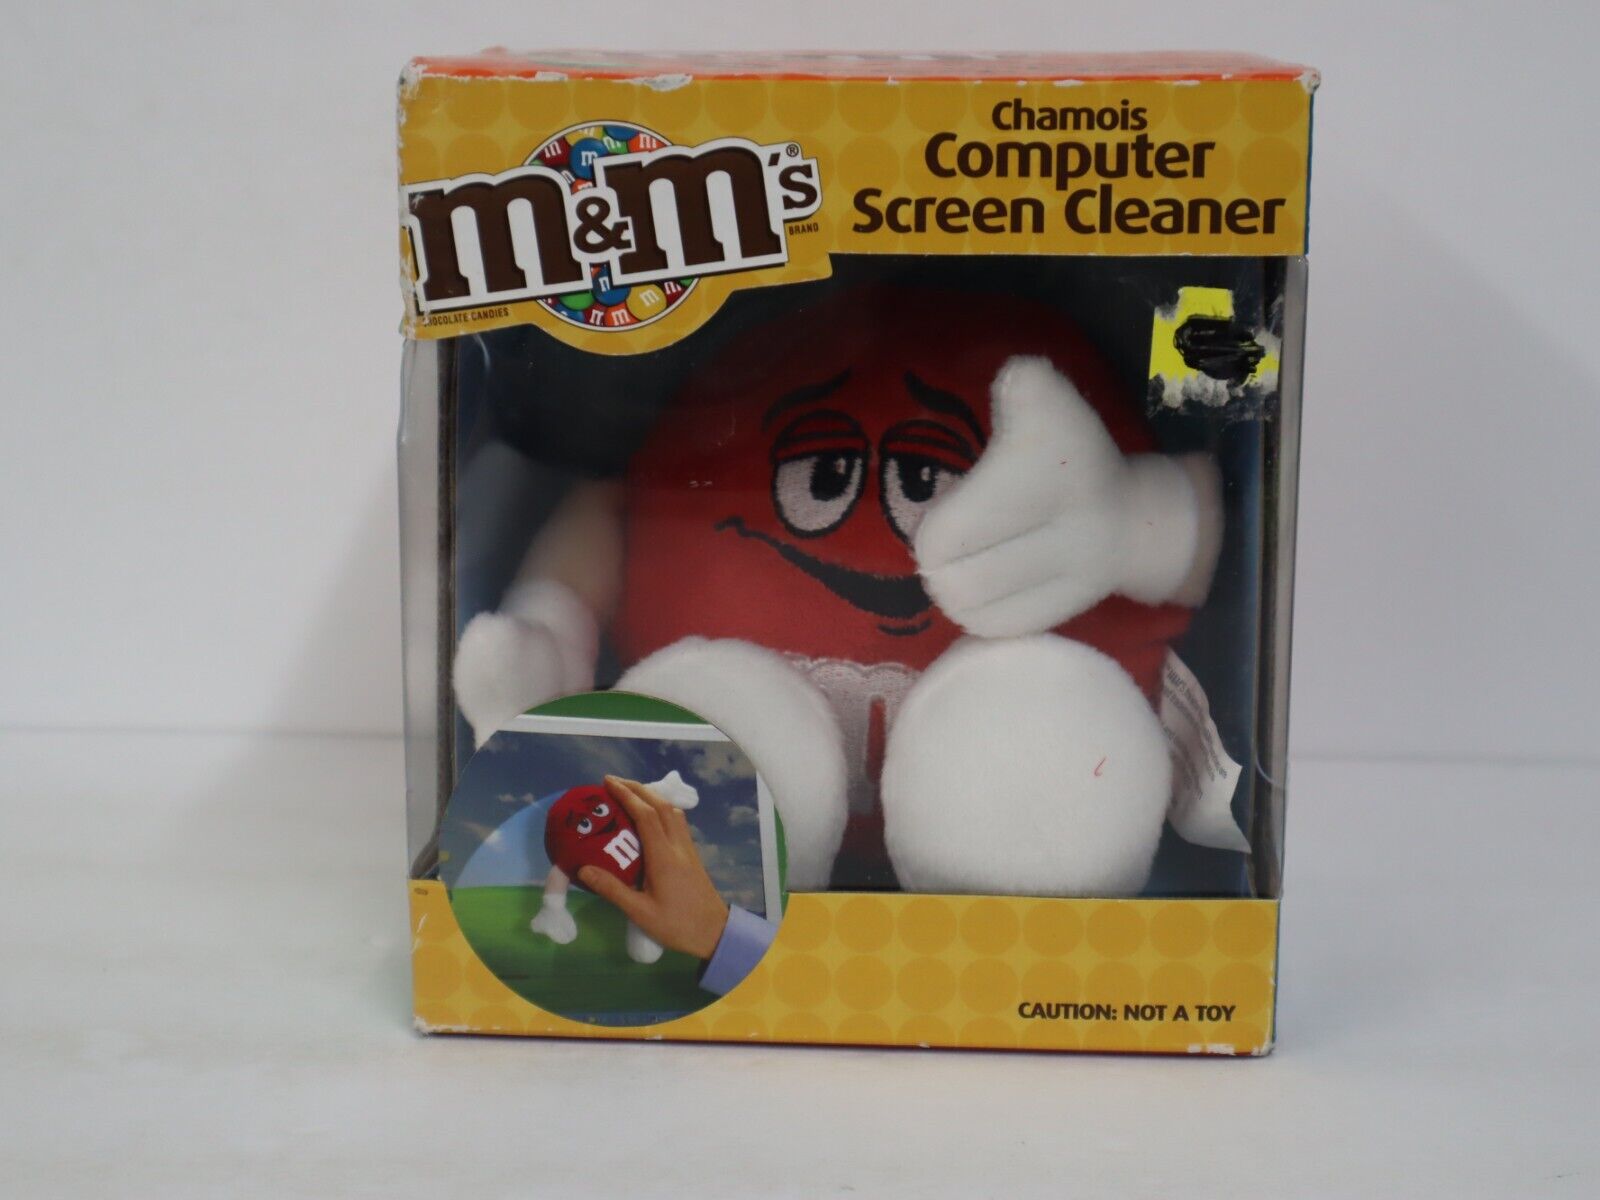 VINTAGE CHAMOIS COMPUTER SCREEN CLEANER ADORABLE M&M'S CHARACTERS